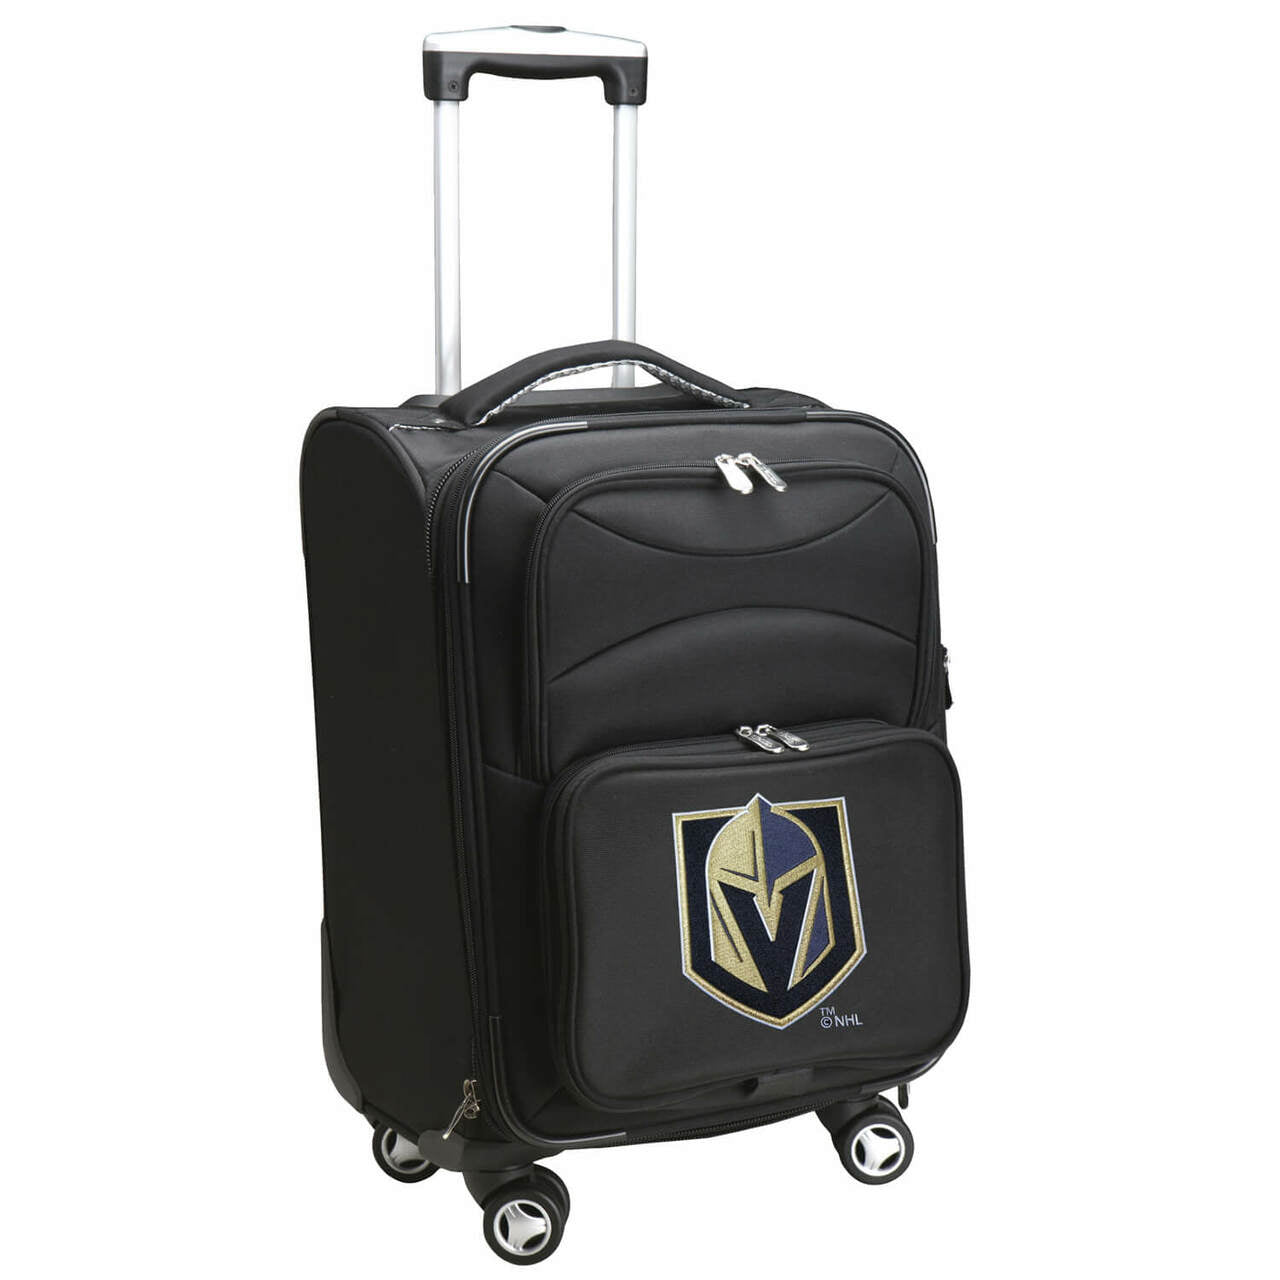 Vegas Golden Knights 21" Softsided Luggage Carry-on Spinner in Black